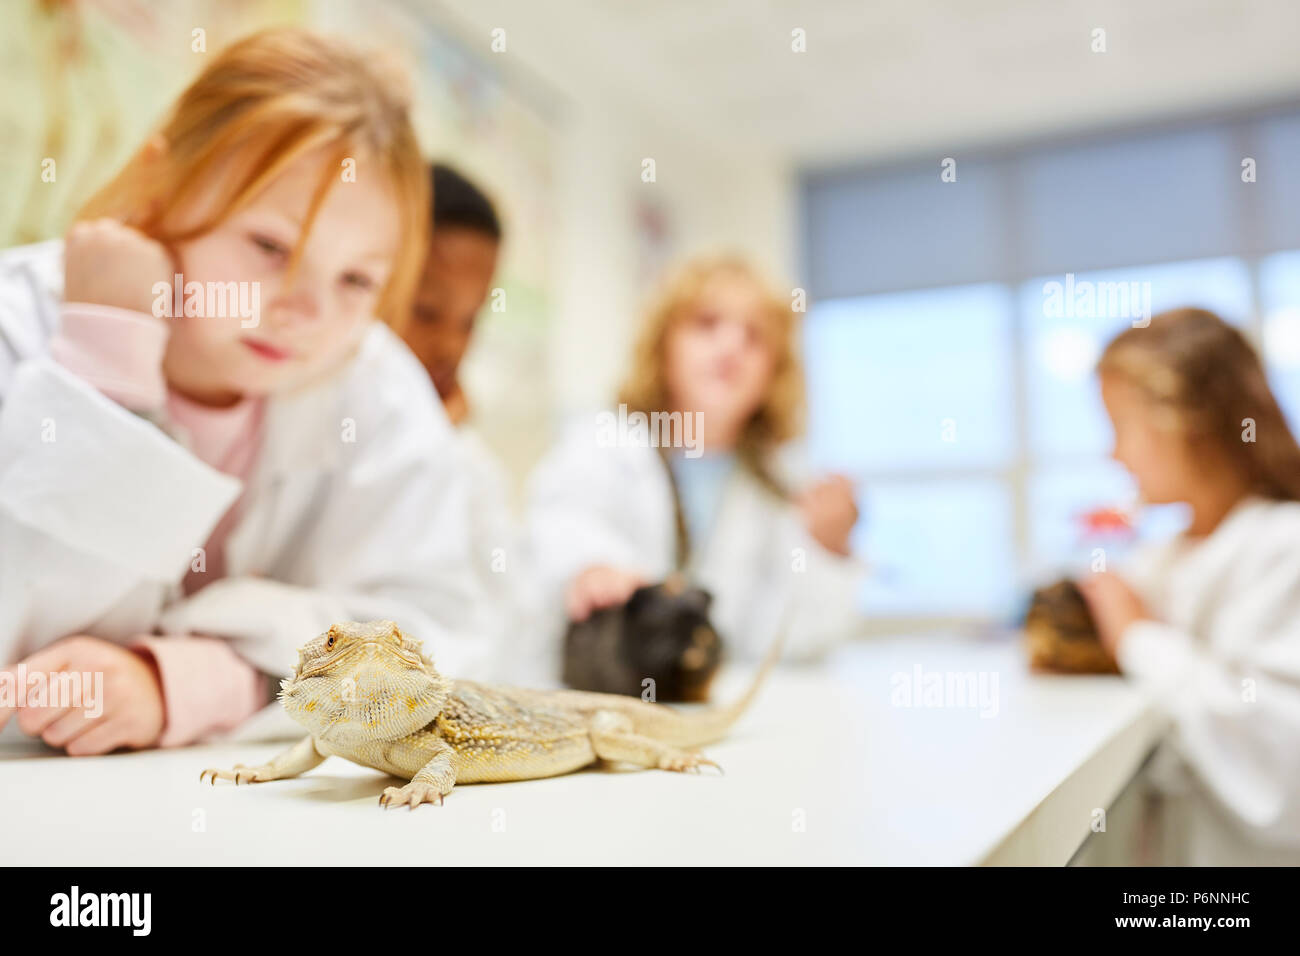 Children explore an exotic iguana and other animals in biology lesson Stock Photo